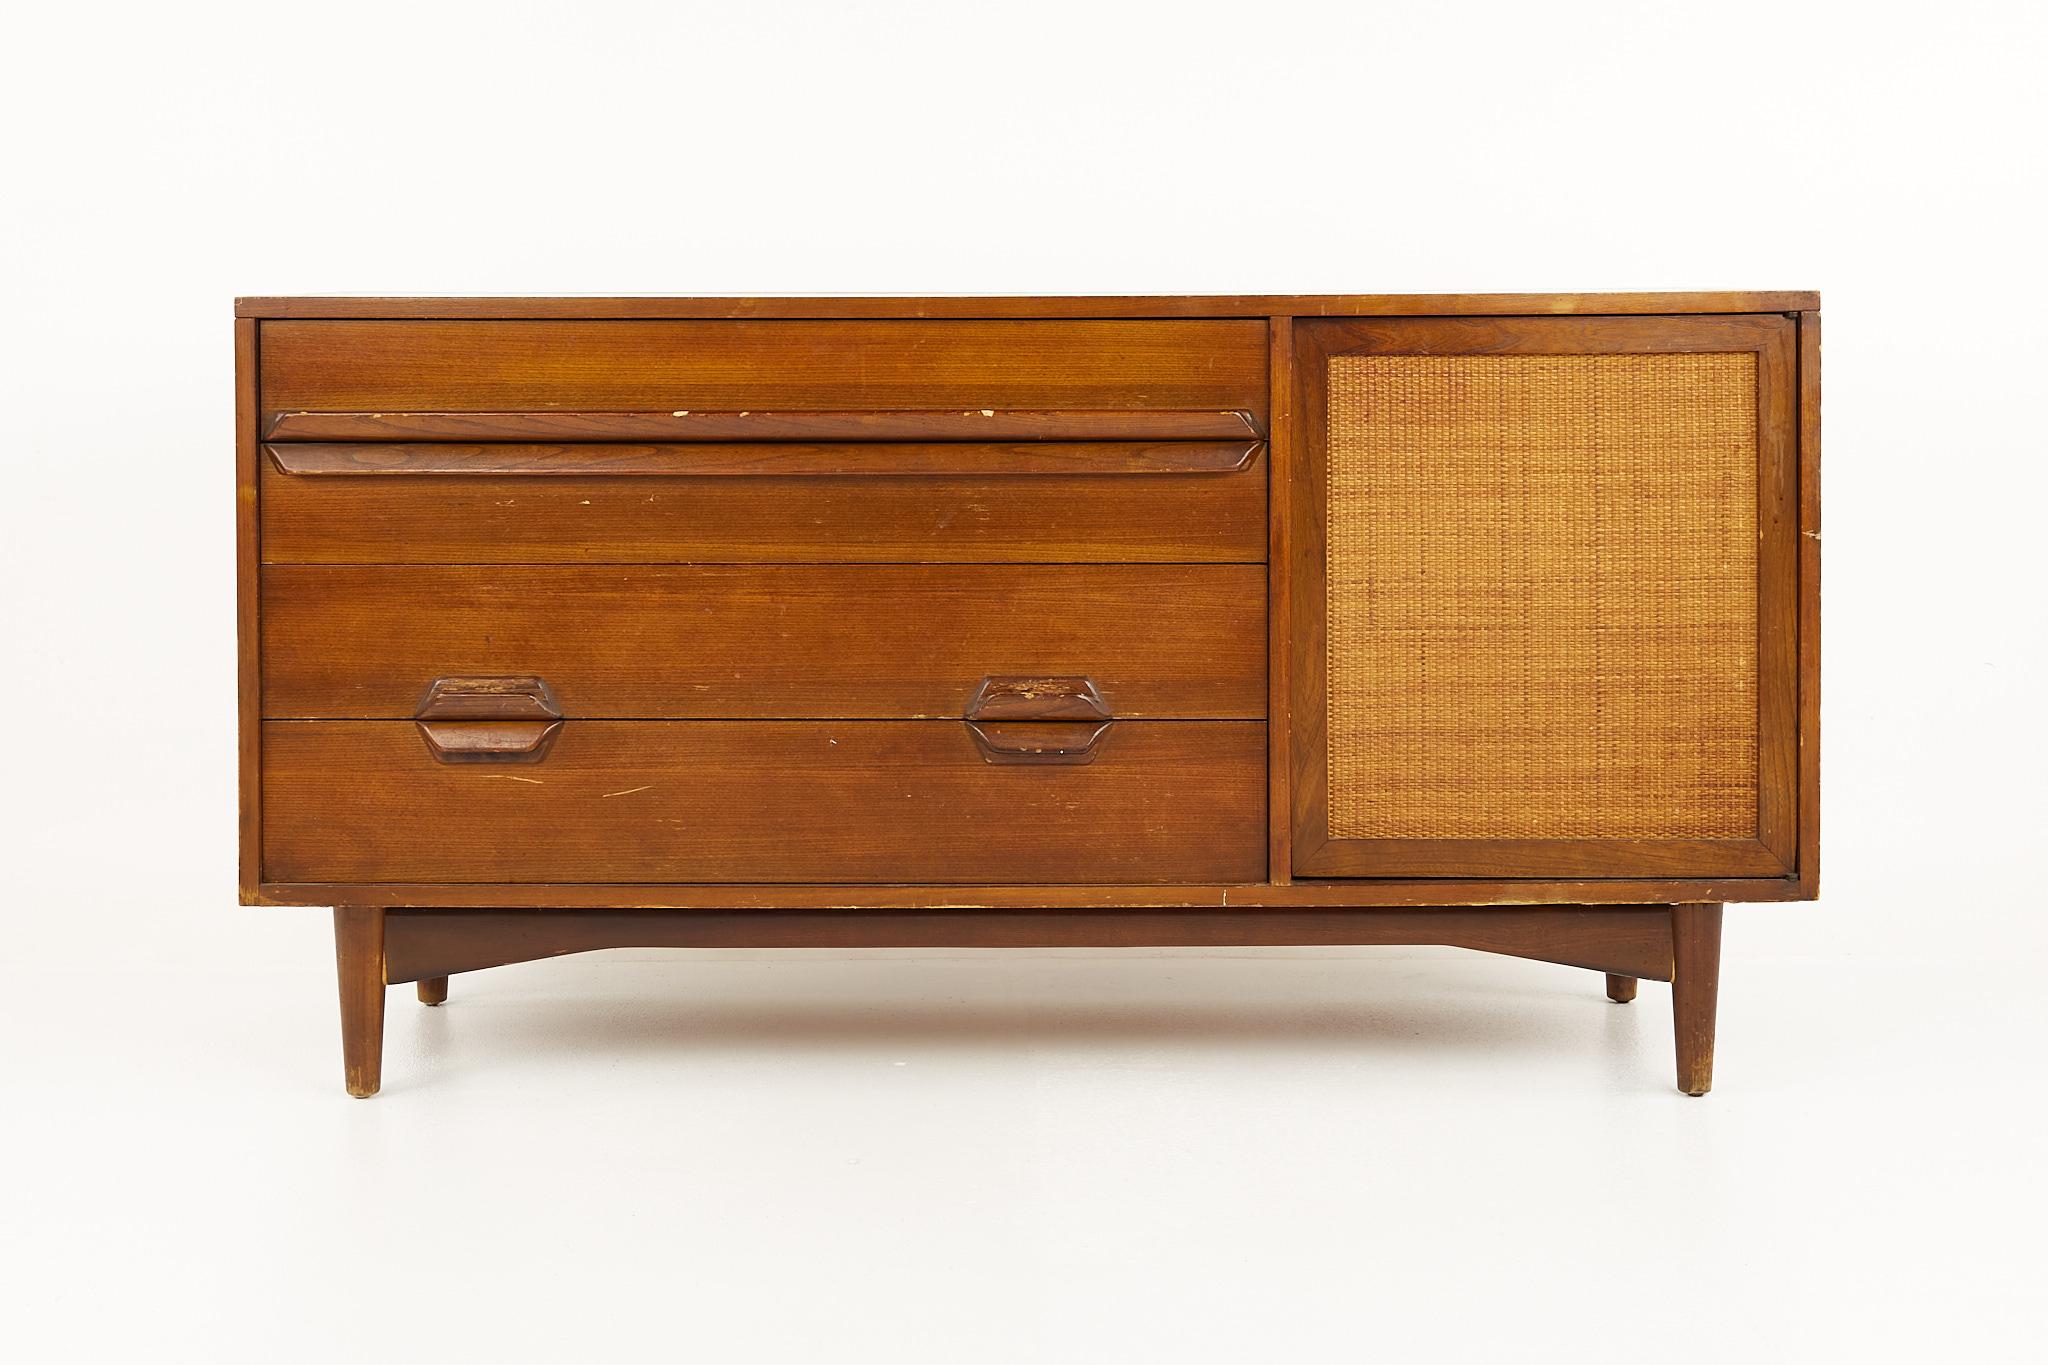 Lawrence Peabody mid century walnut and cane sideboard credenza

This credenza measures: 58 wide x 19 deep x 30 inches high

All pieces of furniture can be had in what we call restored vintage condition. That means the piece is restored upon